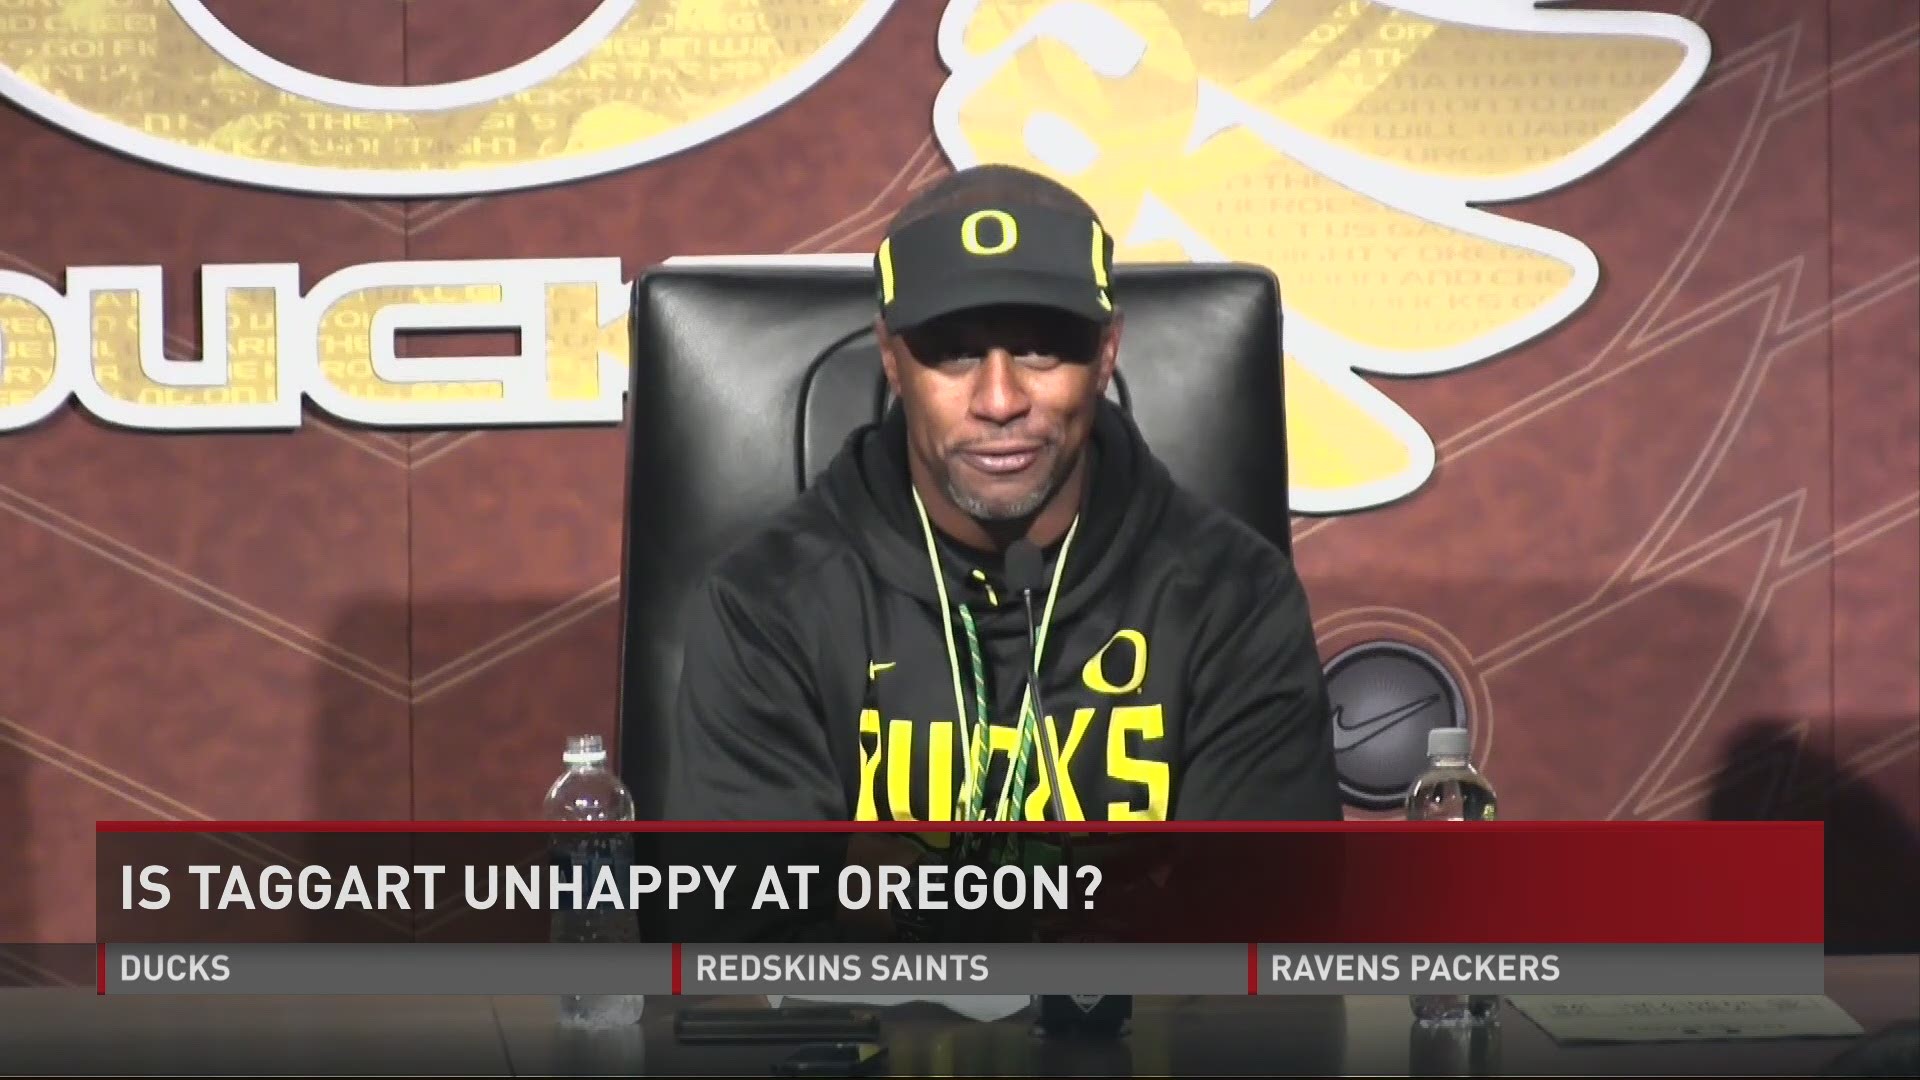 KGW's John Canzano and Orlando Sanchez talk about the rumors that Oregon Ducks head football coach Willie Taggart is unhappy and wants out of Oregon.